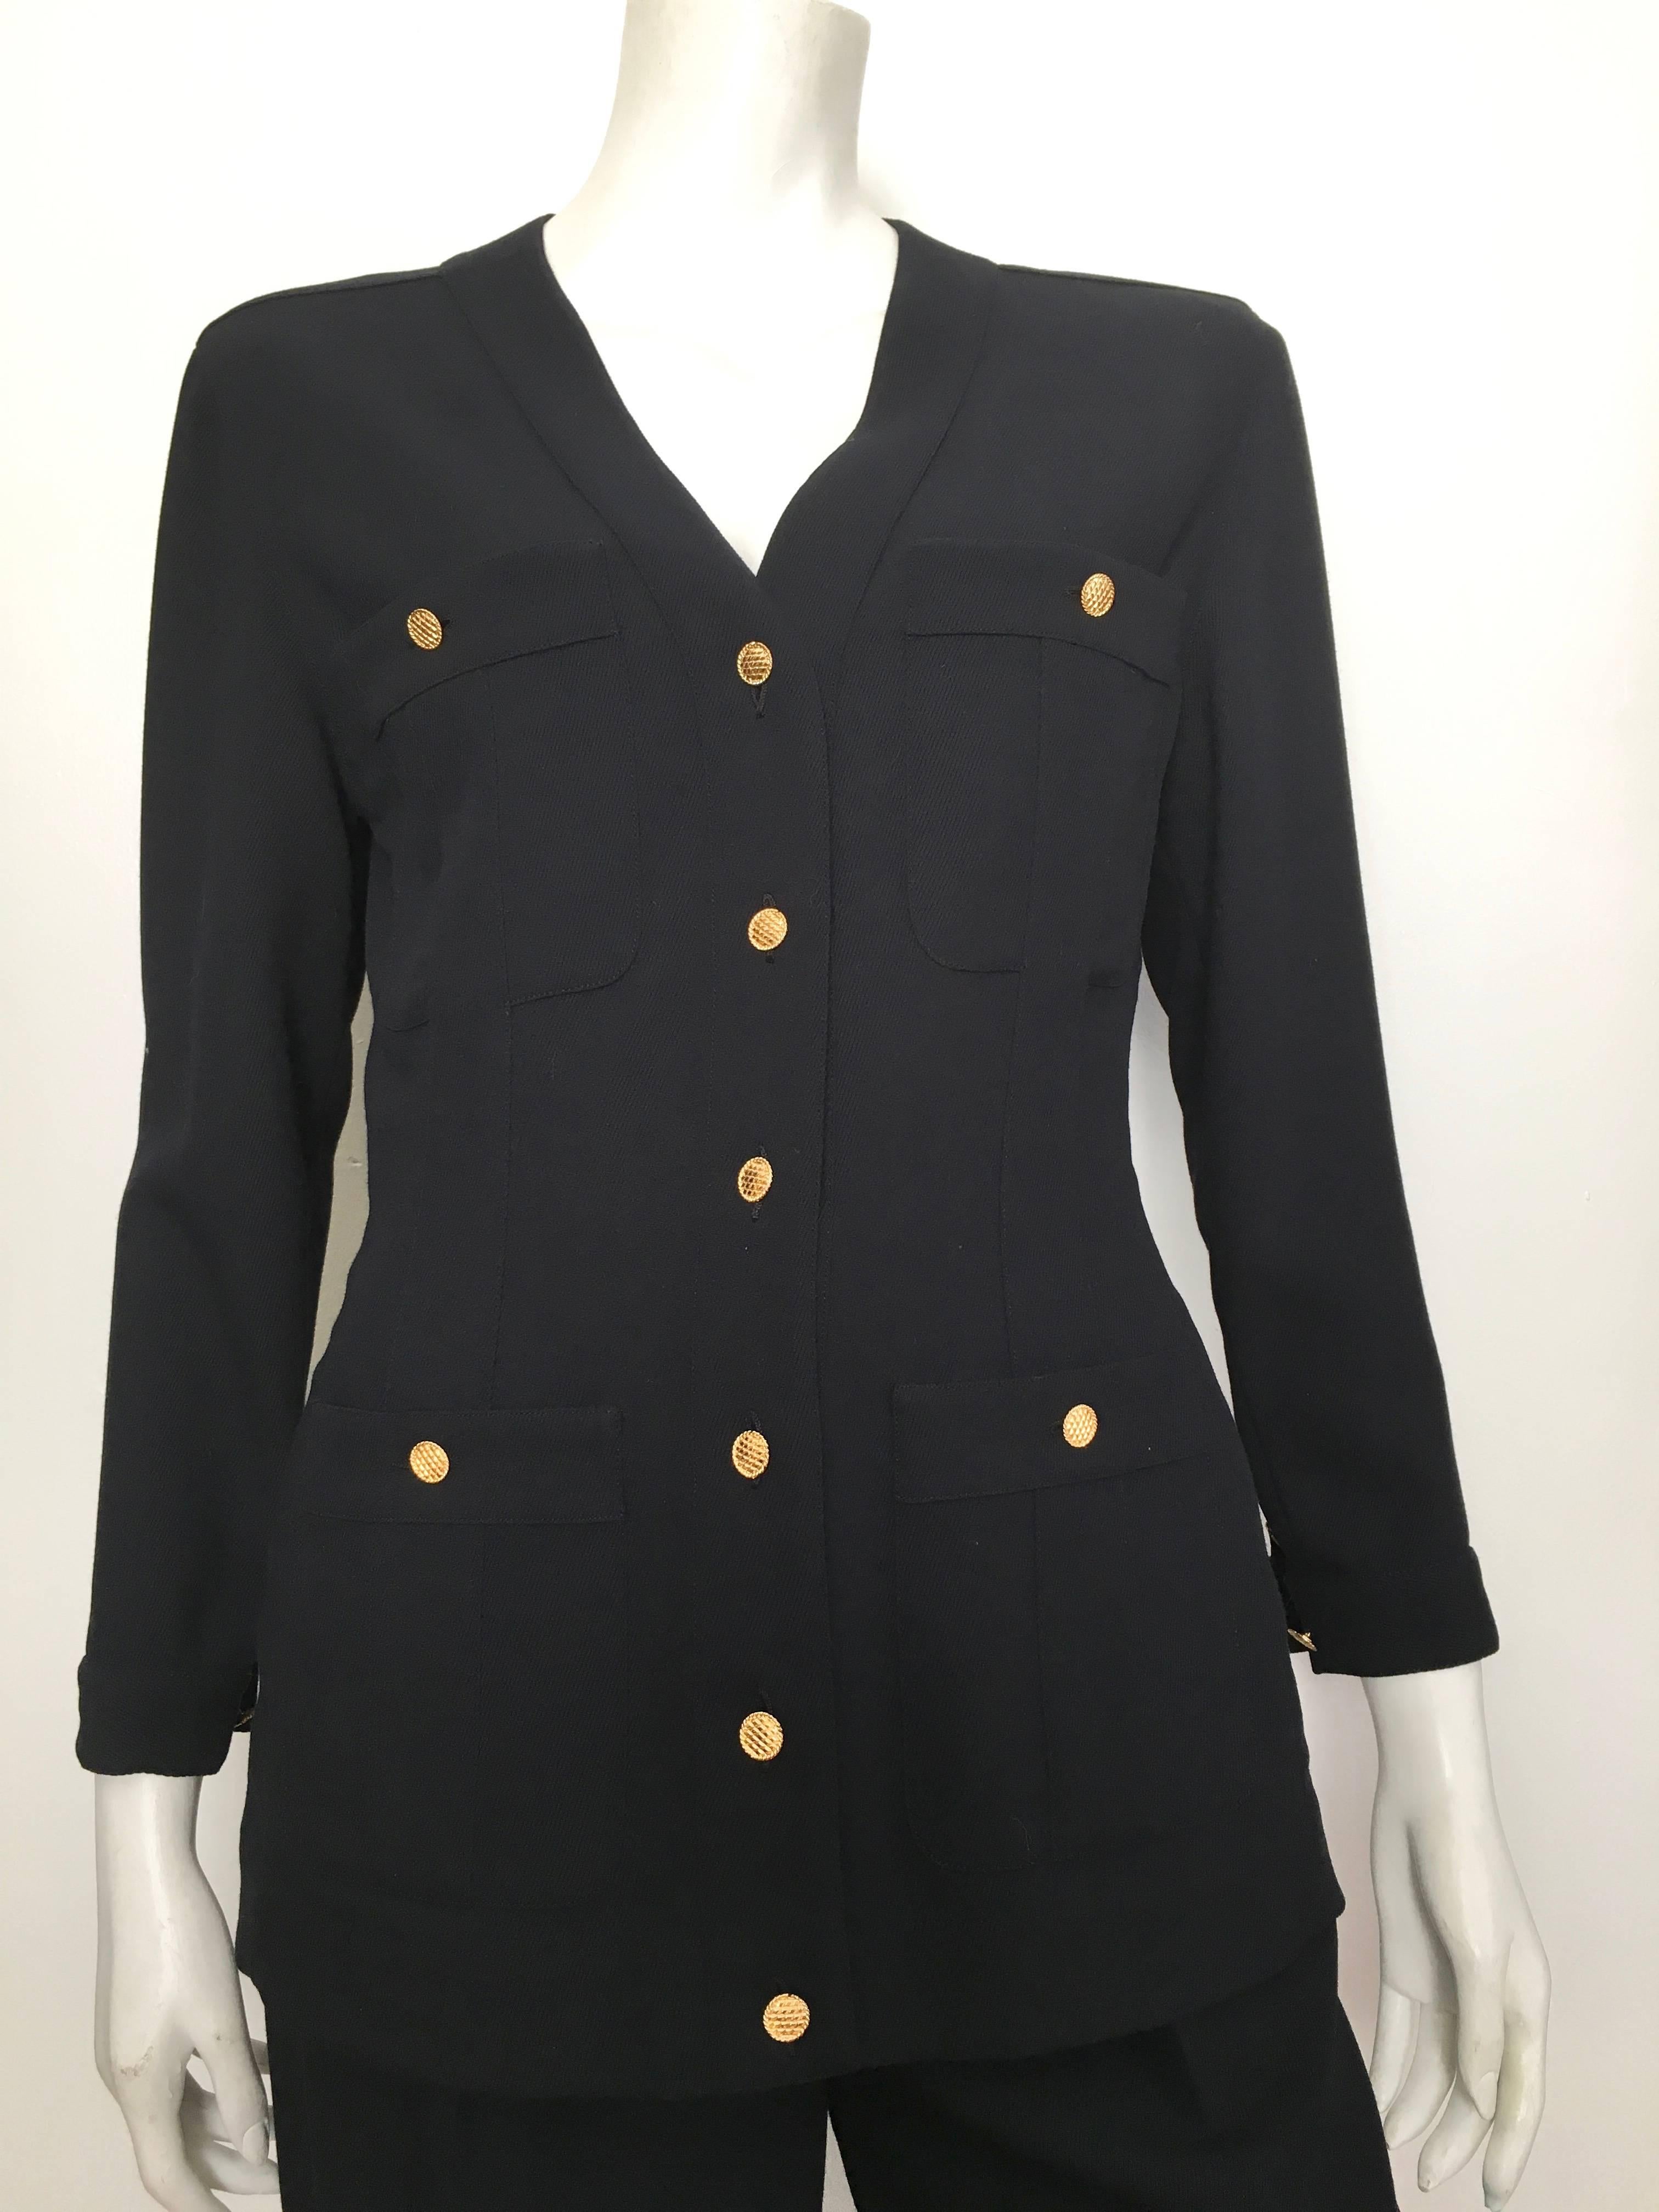 Chanel 1980s navy gabardine wool jacket & pant set is a size 4. Ladies please grab your best friend, Mr. Tape Measure, so you can measure your bust, waist & hips to make certain this vintage treasure will fit your lovely body.  Button up long sleeve